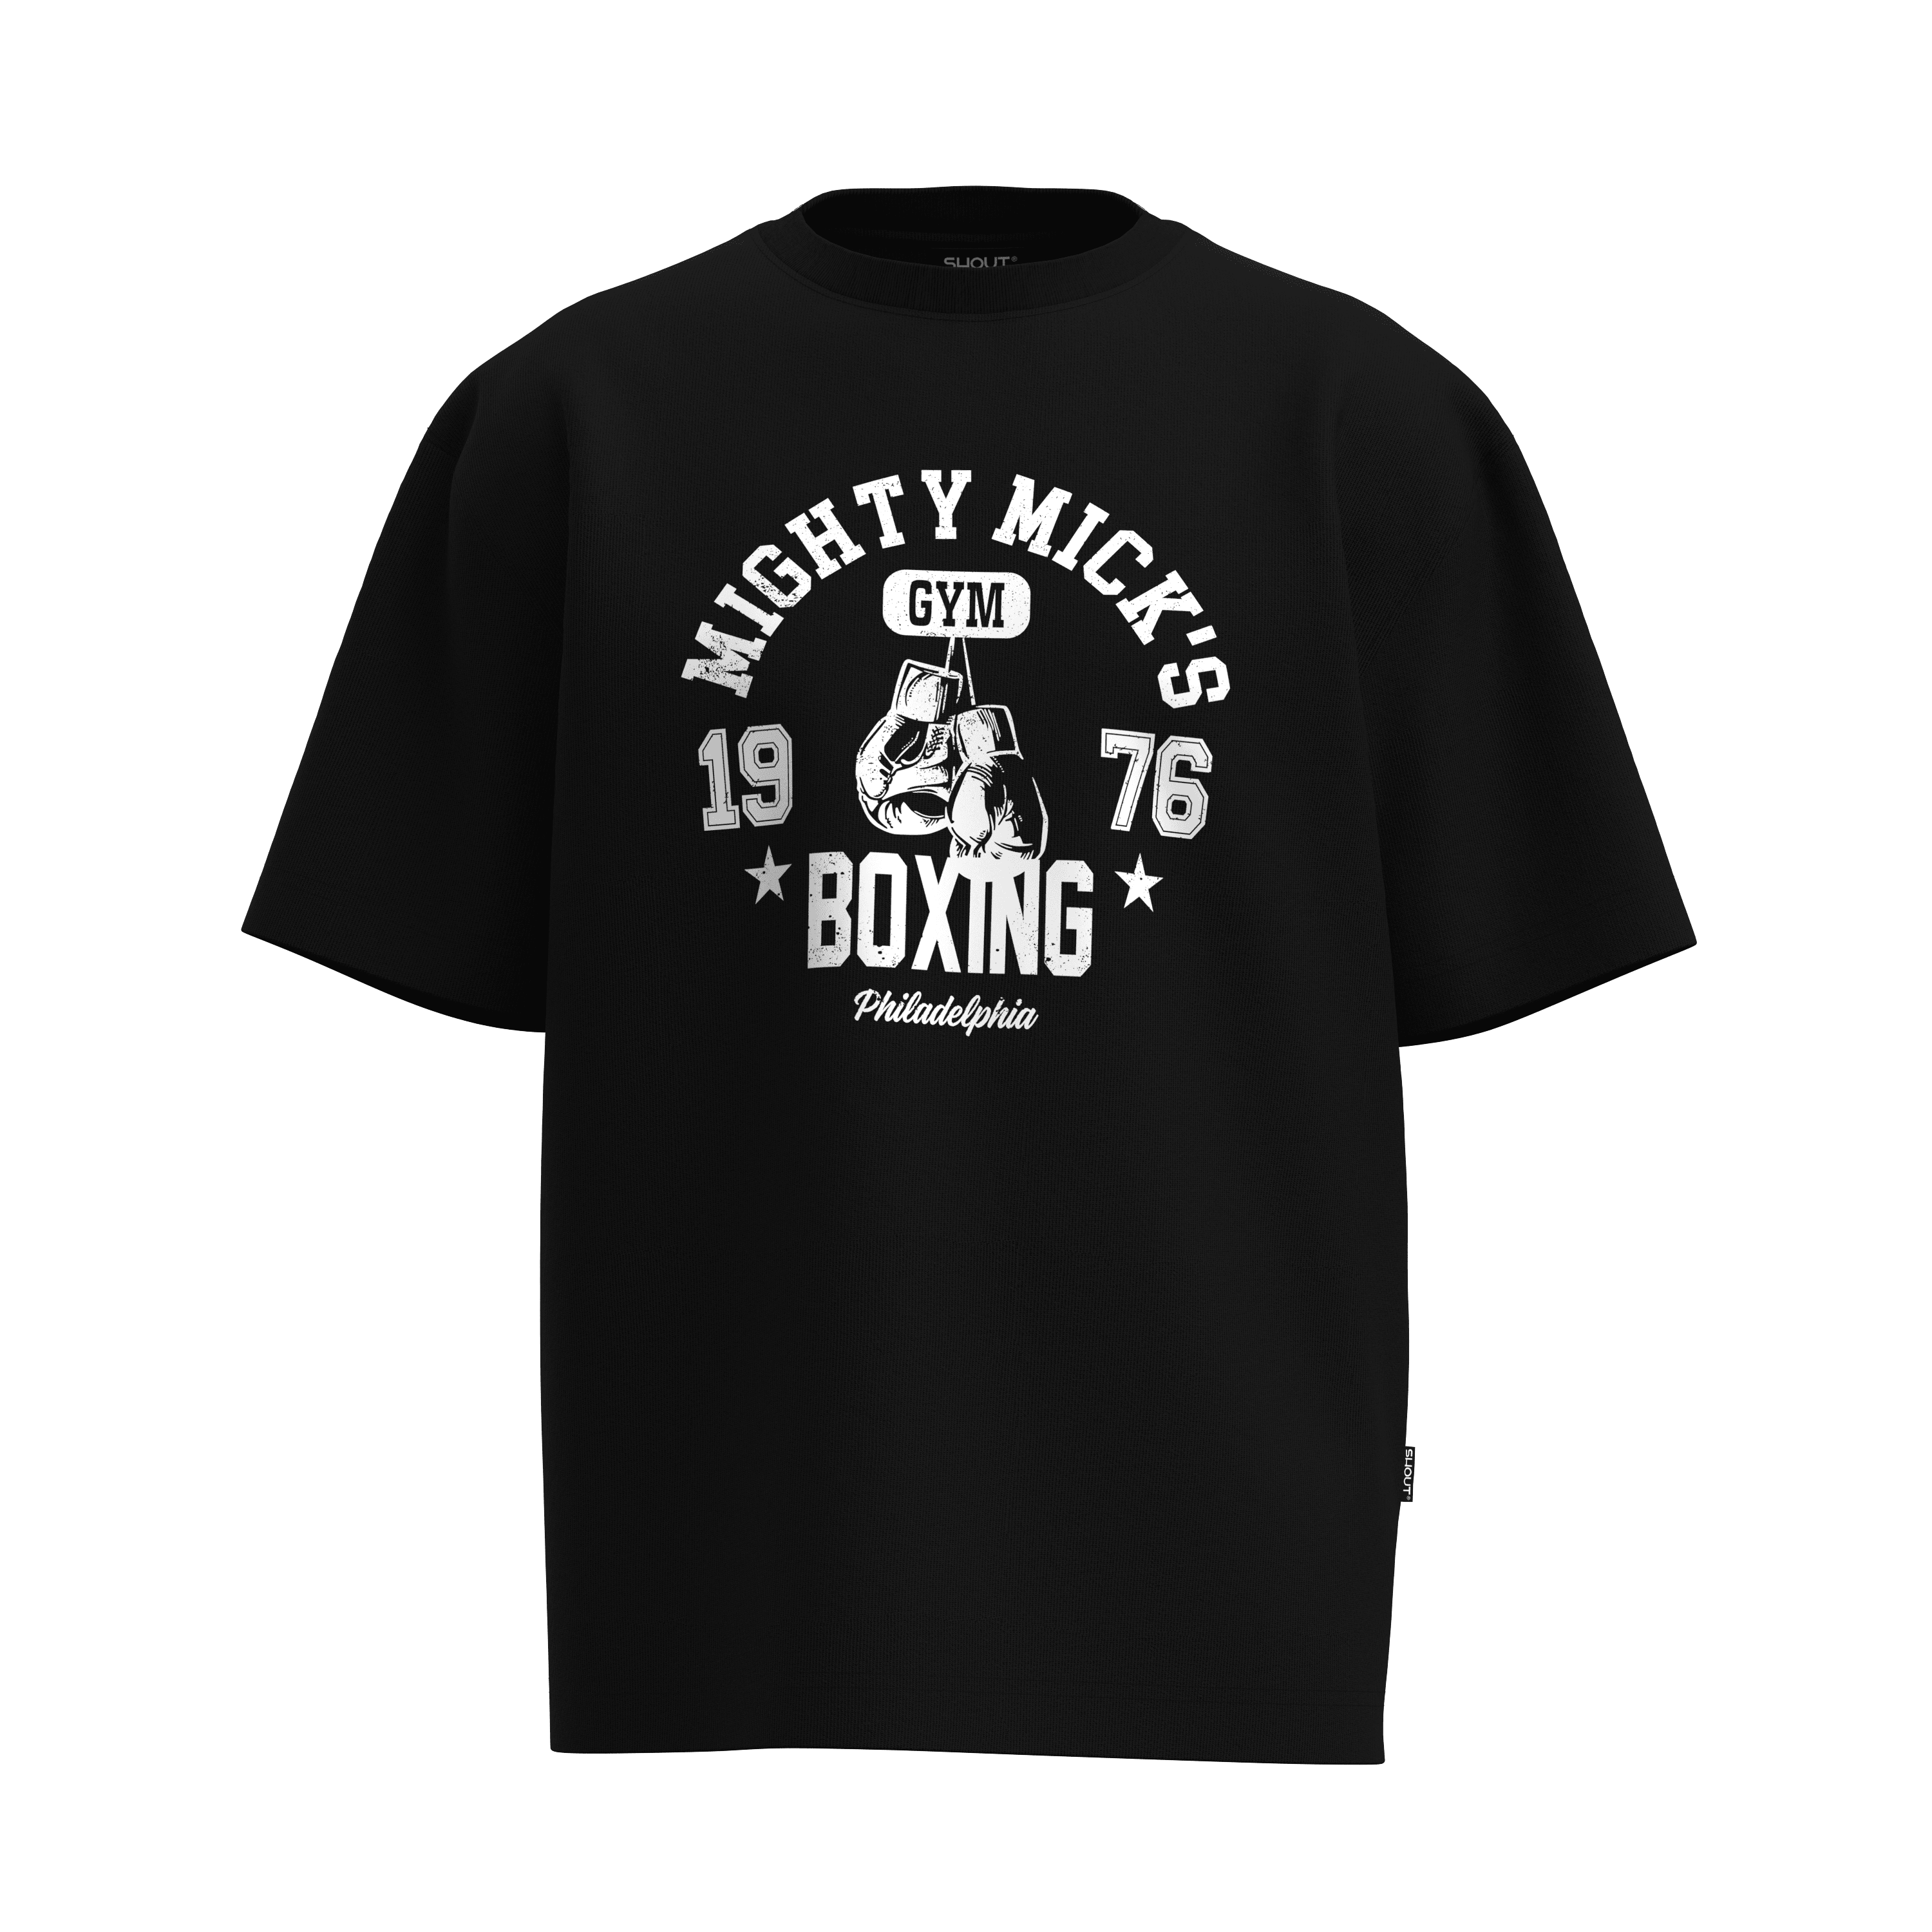 Oversize Shout Mighty Mick's 1976 Boxing Unisex T-Shirt